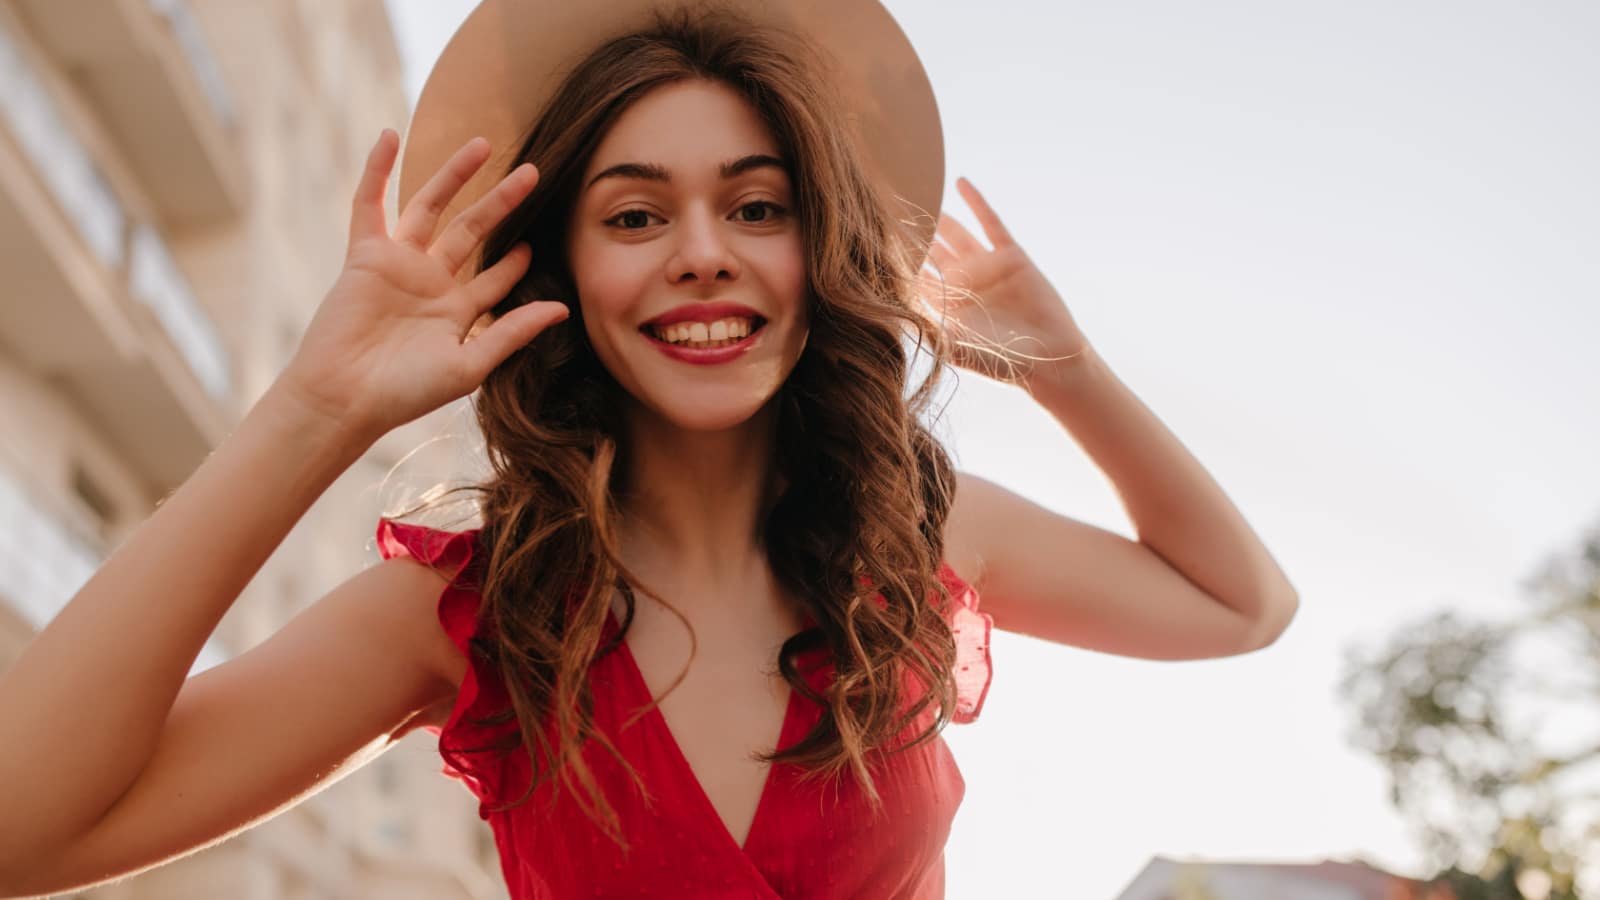 Close shot photography of cheerful girl touching her hat and beautiful long hair. Woman happy to be outside after the lockdown and enjoy the summer and warm weather in her favourite dress